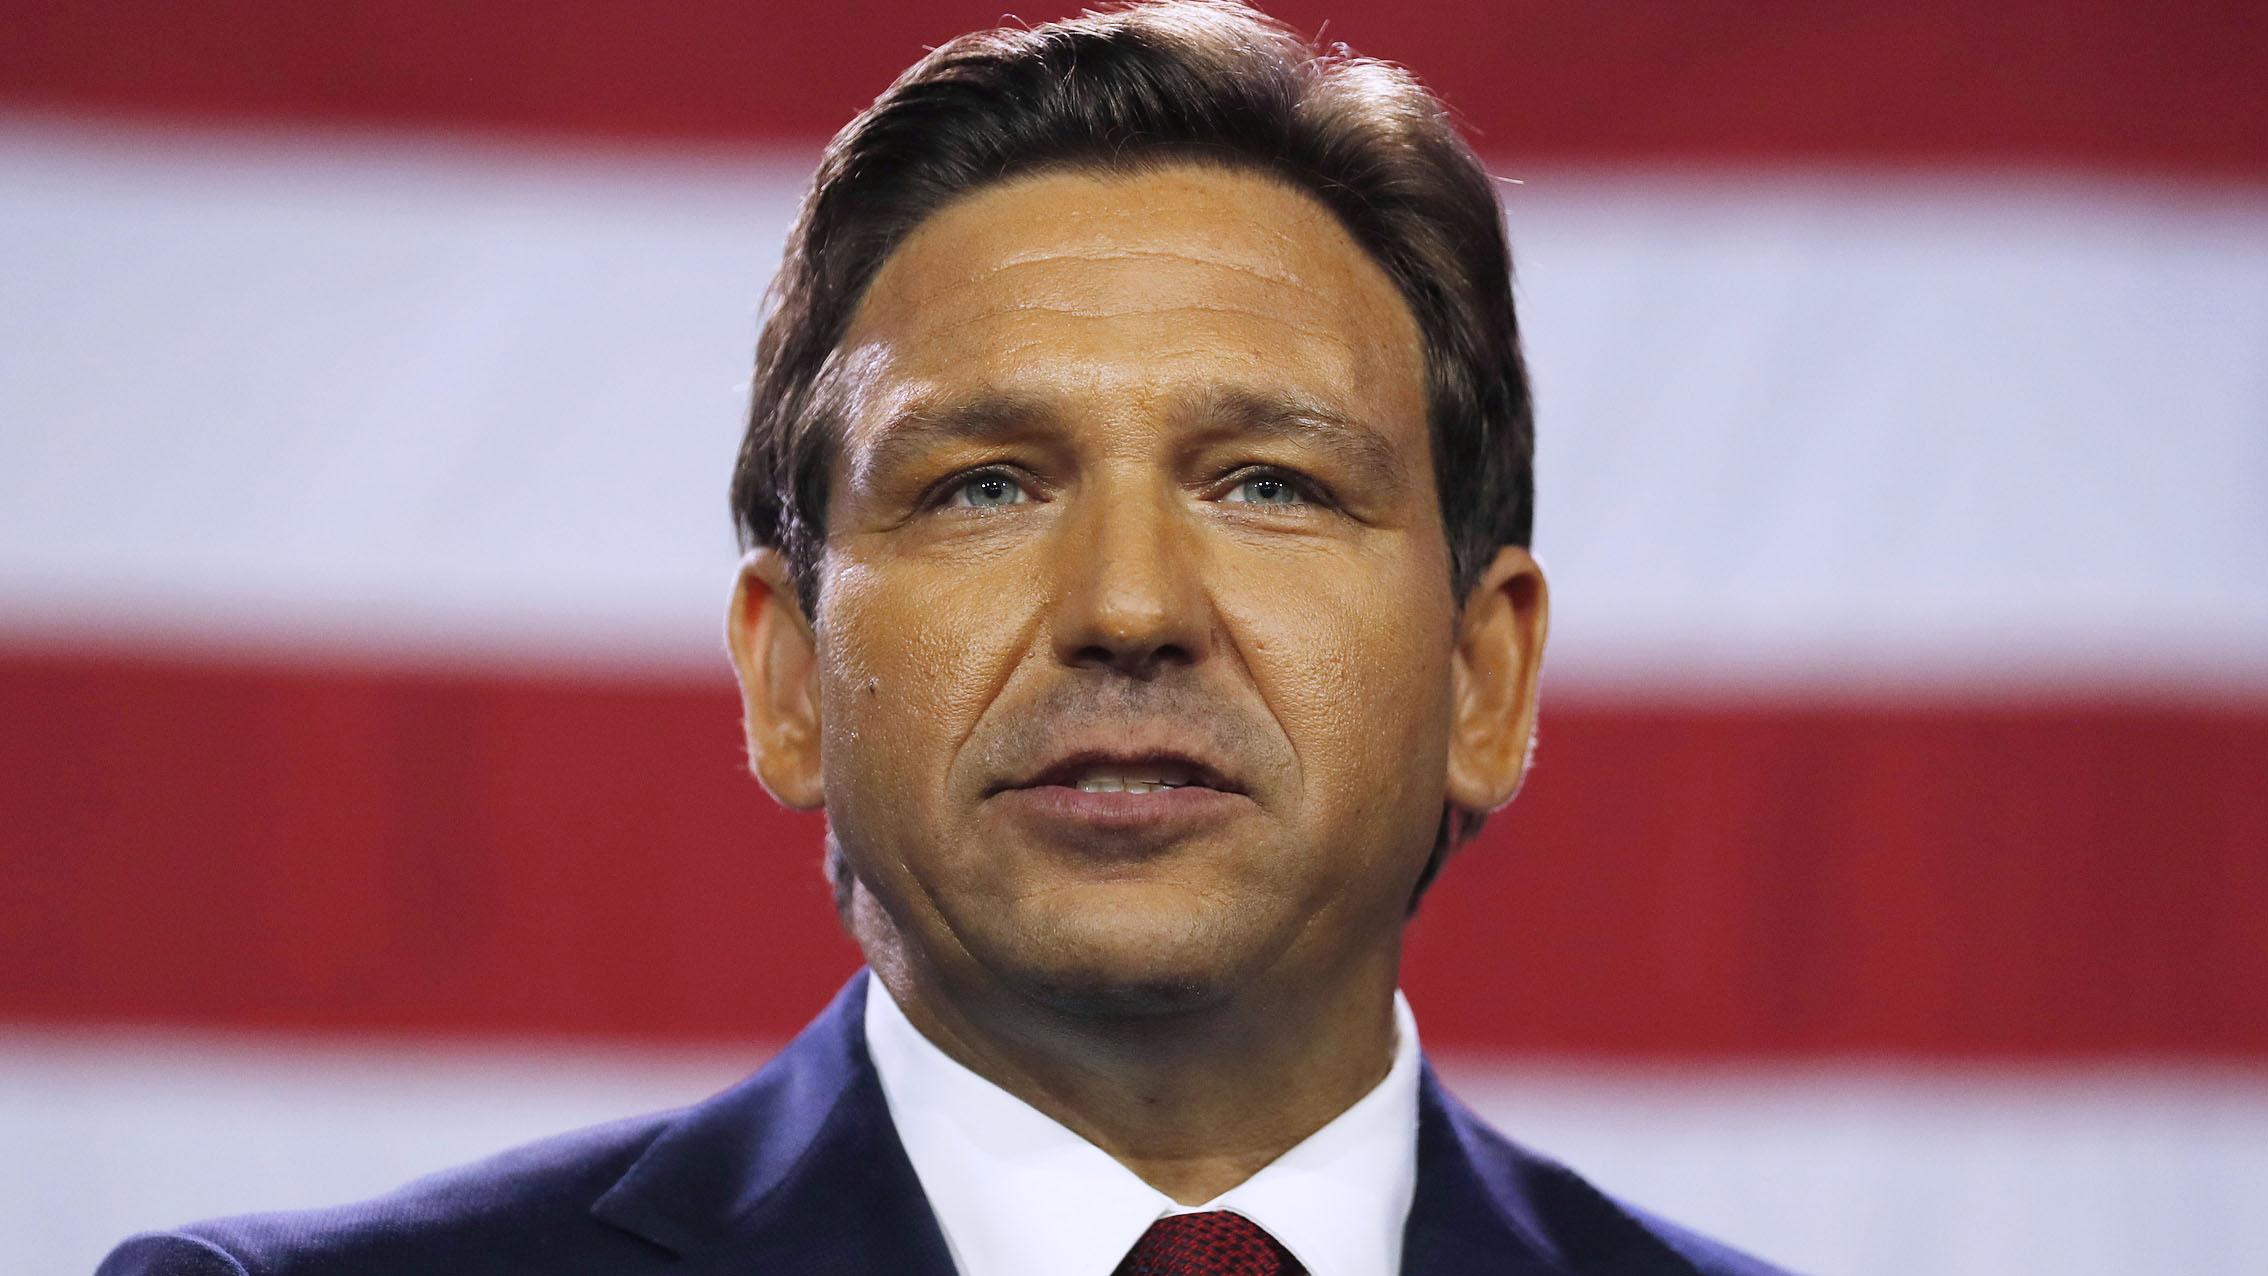 DeSantis To Trump: Stop ‘Keyboard’ Attacks, Say It To My Face In One-On-One Debate